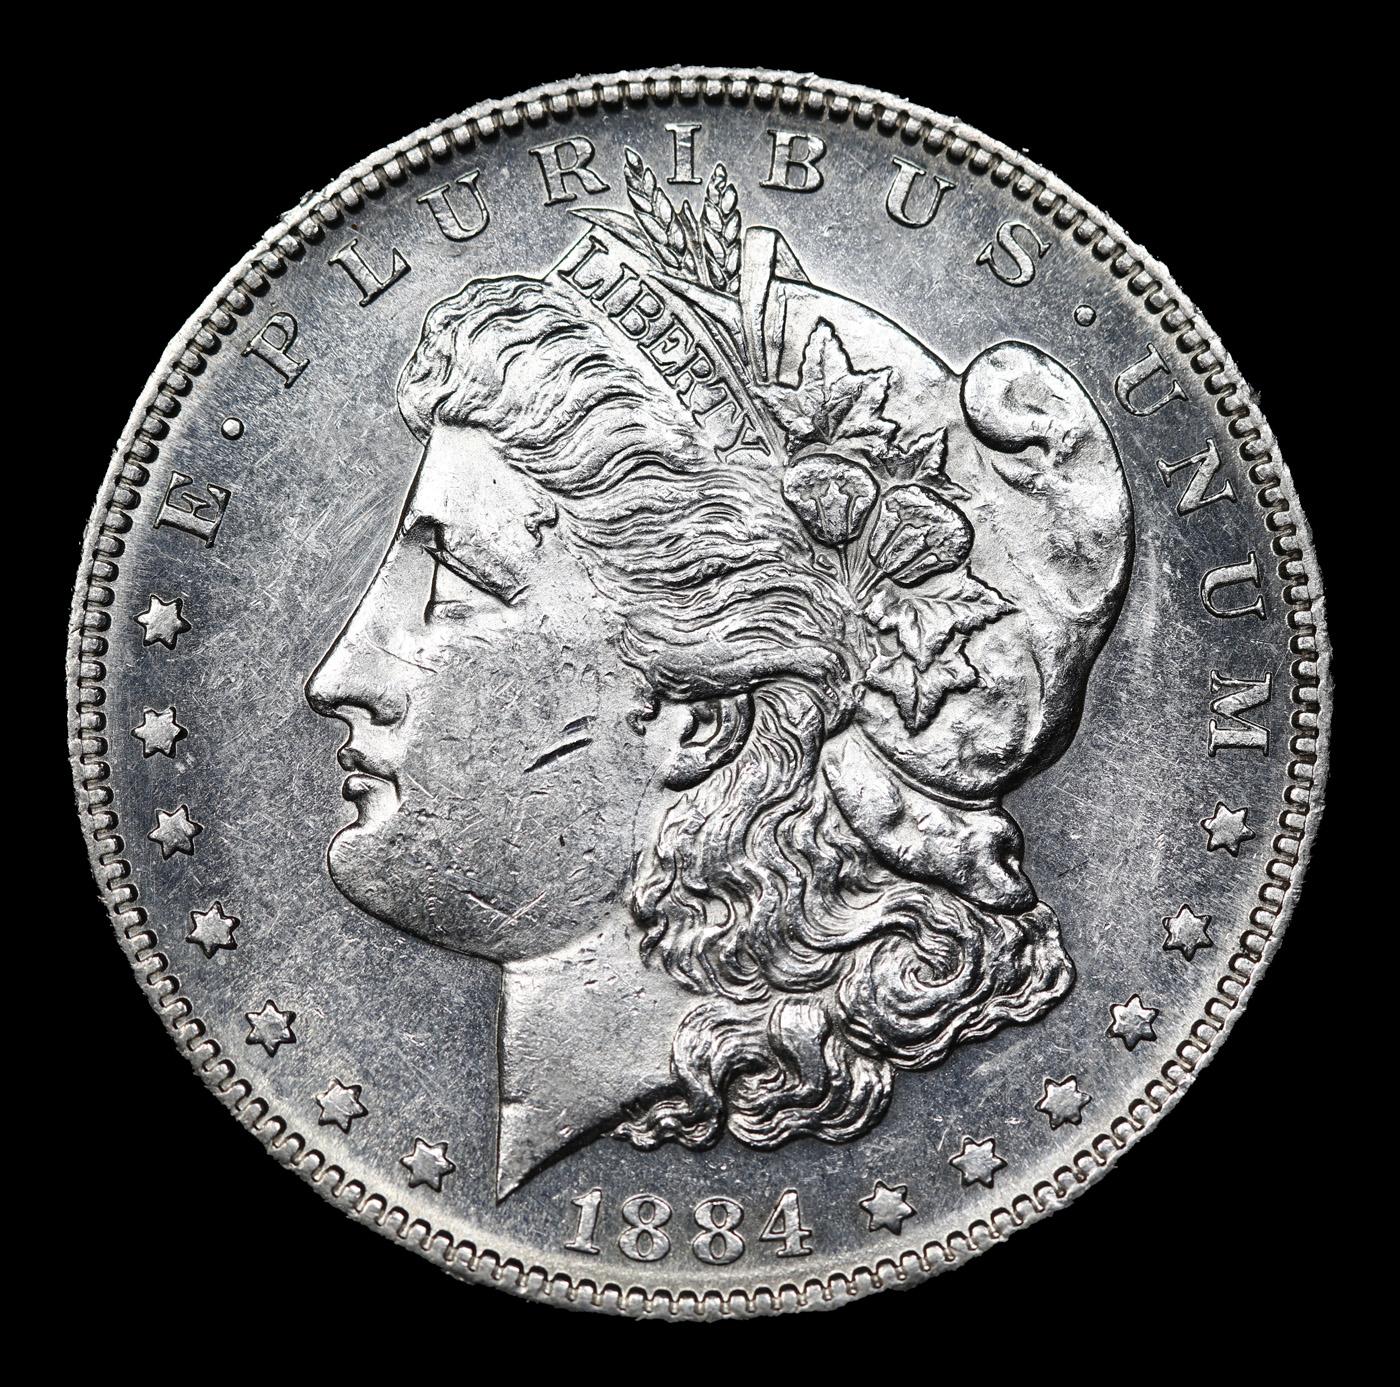 ***Auction Highlight*** 1884-s Morgan Dollar $1 Graded Select Unc+ PL By USCG (fc)